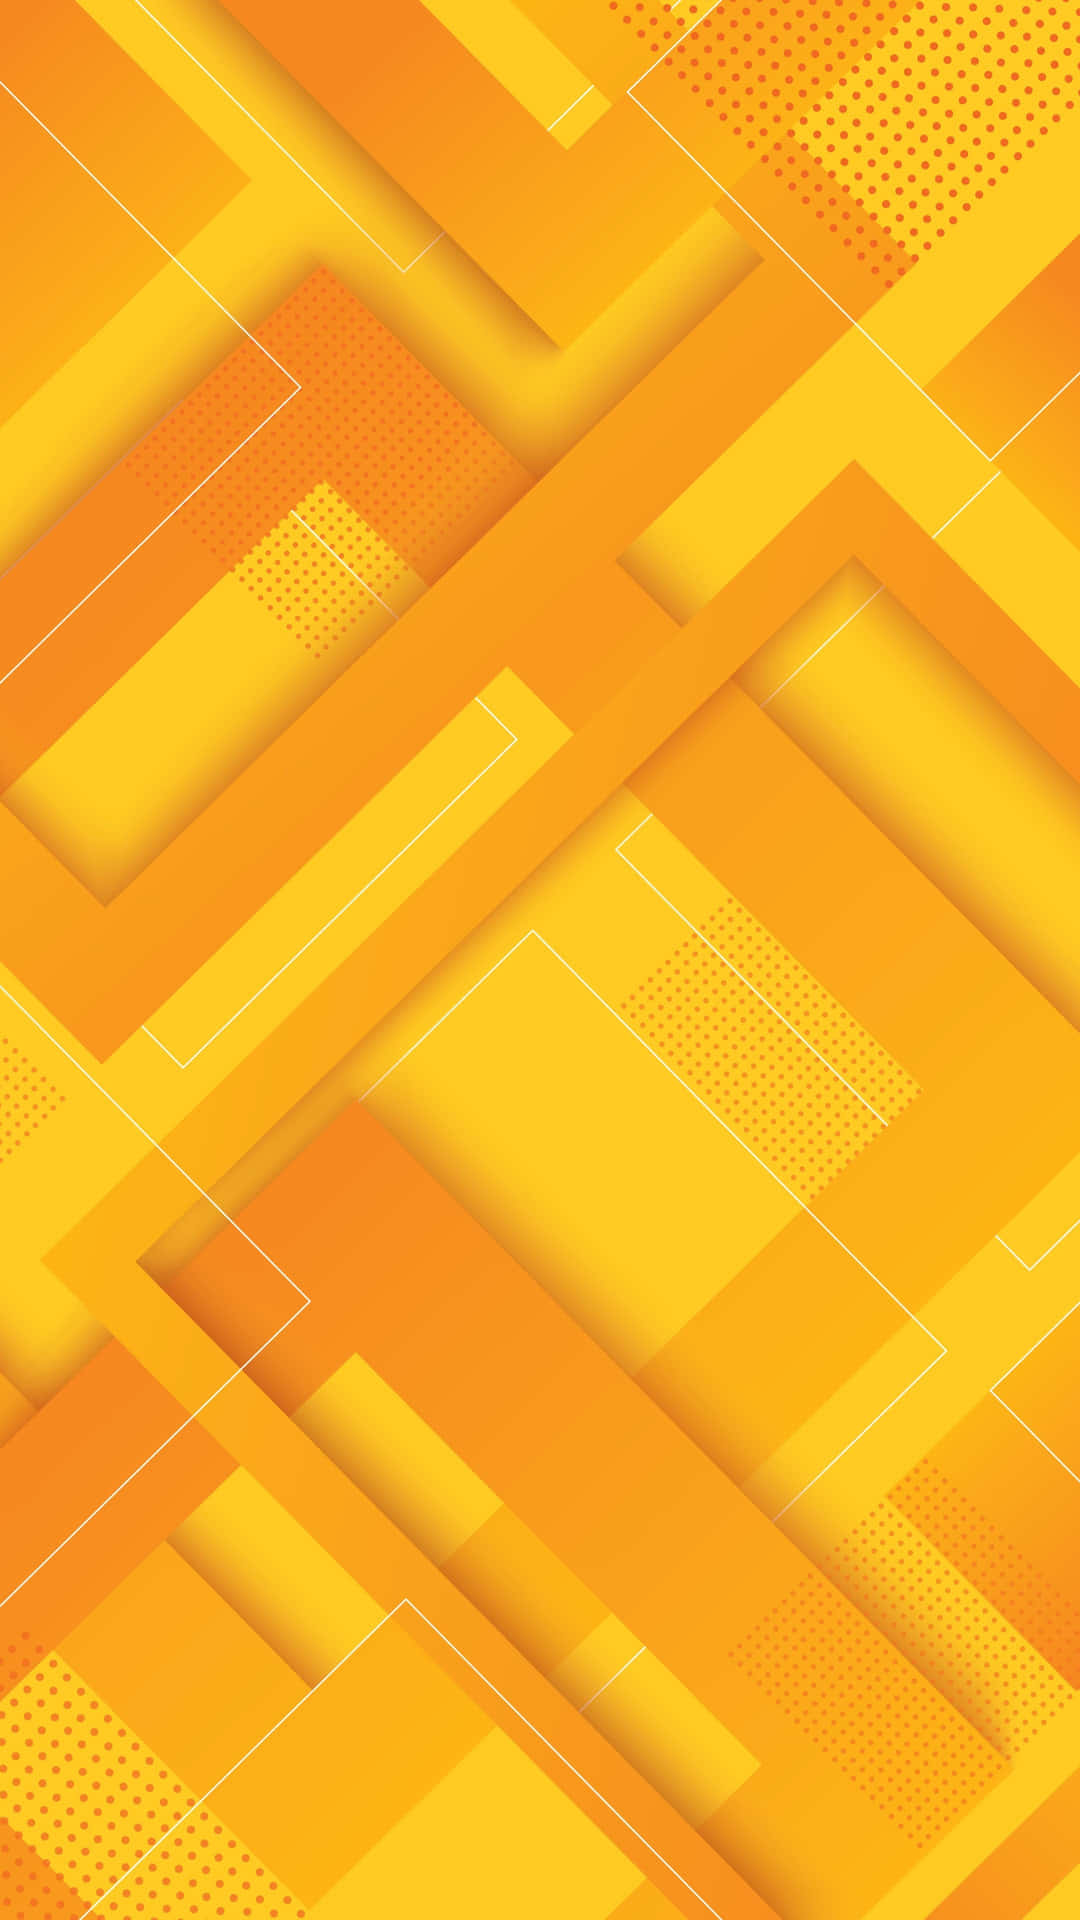 abstract geometric background with orange lines